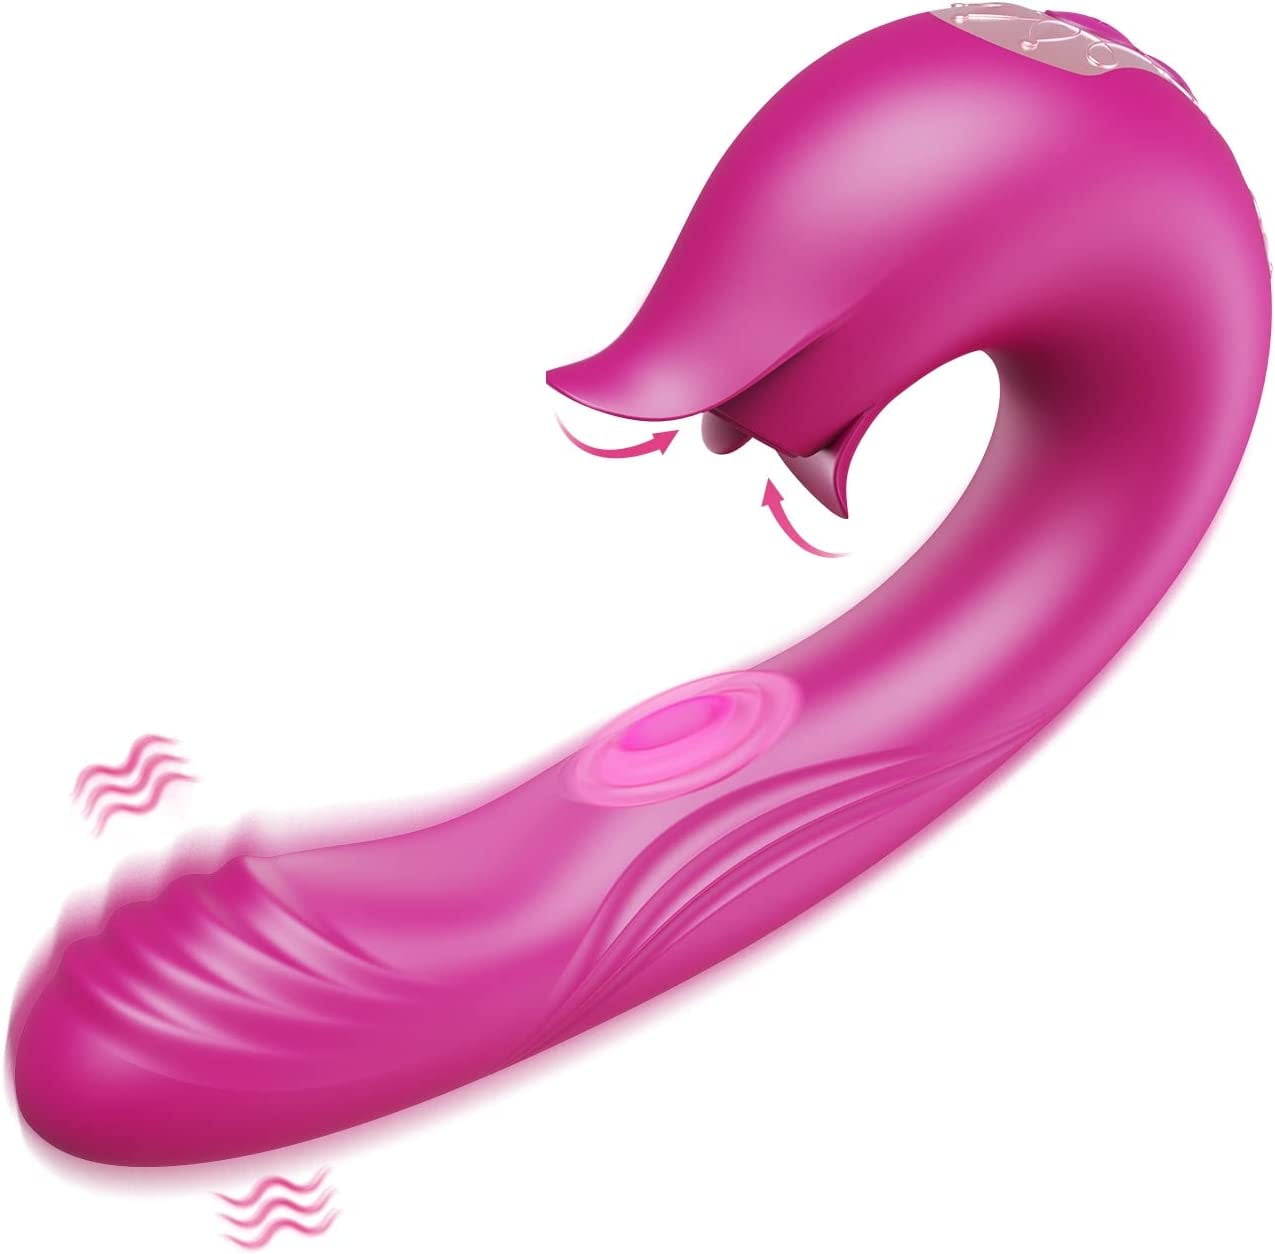 Wtoyu 3 In 1 Clitoral Licking Vibrator G Spot Vibrator Dildo With 7 Vibrating And Licking Modes